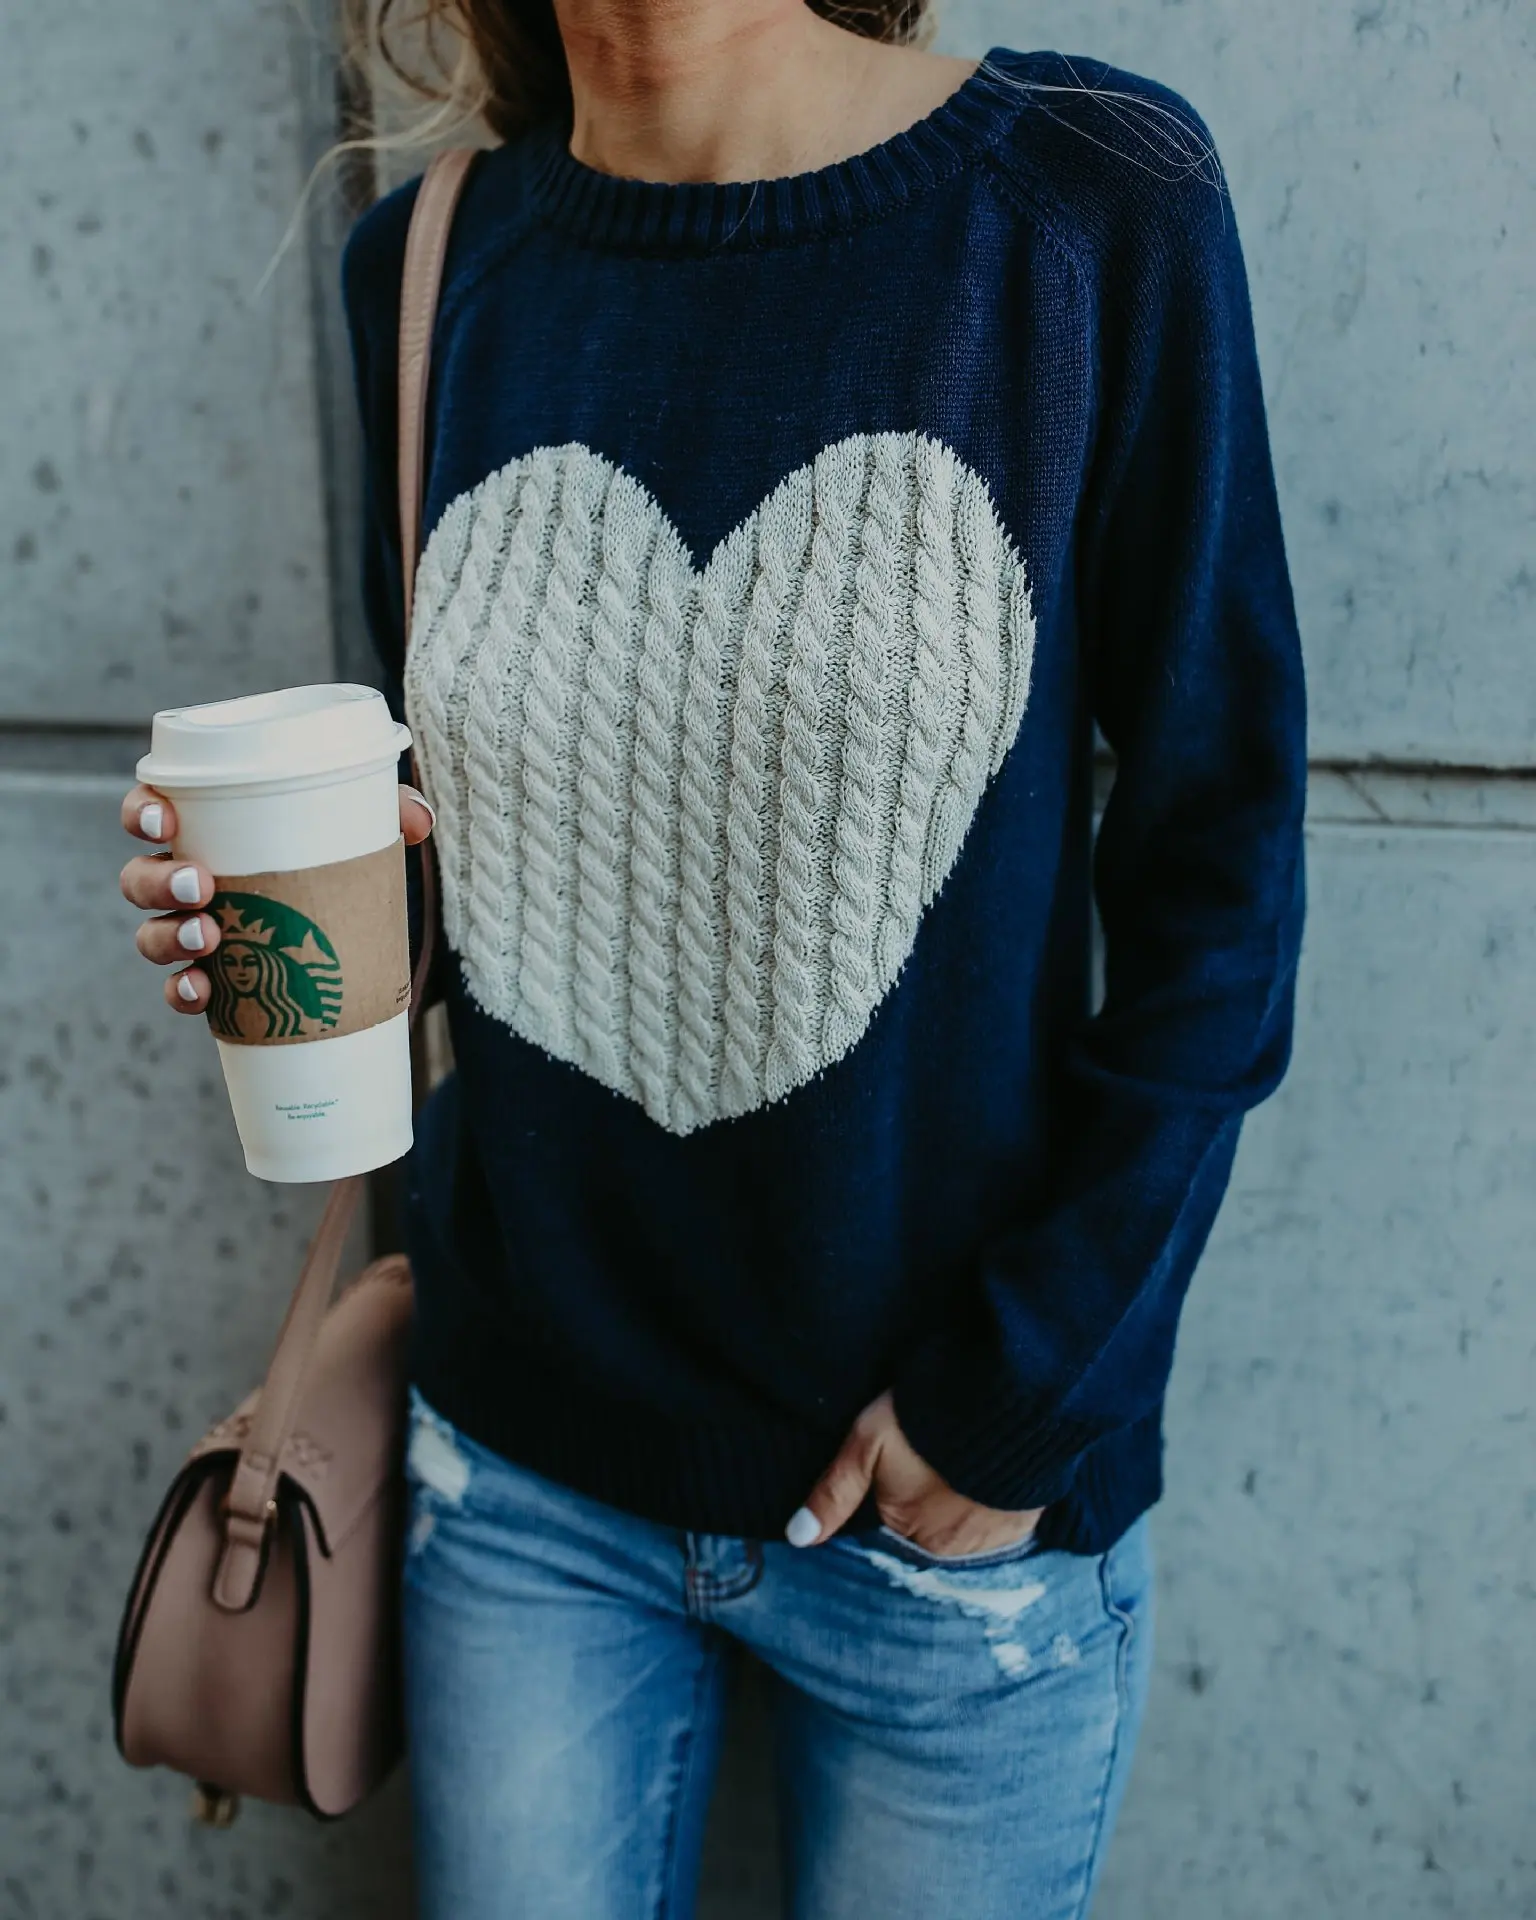 woolen sweater Ladies Long Sleeve Knitwear  Leisure Color Valentine's Day Matching Heart Pattern Round Collar Pullover Sweater Knitted Top turtleneck